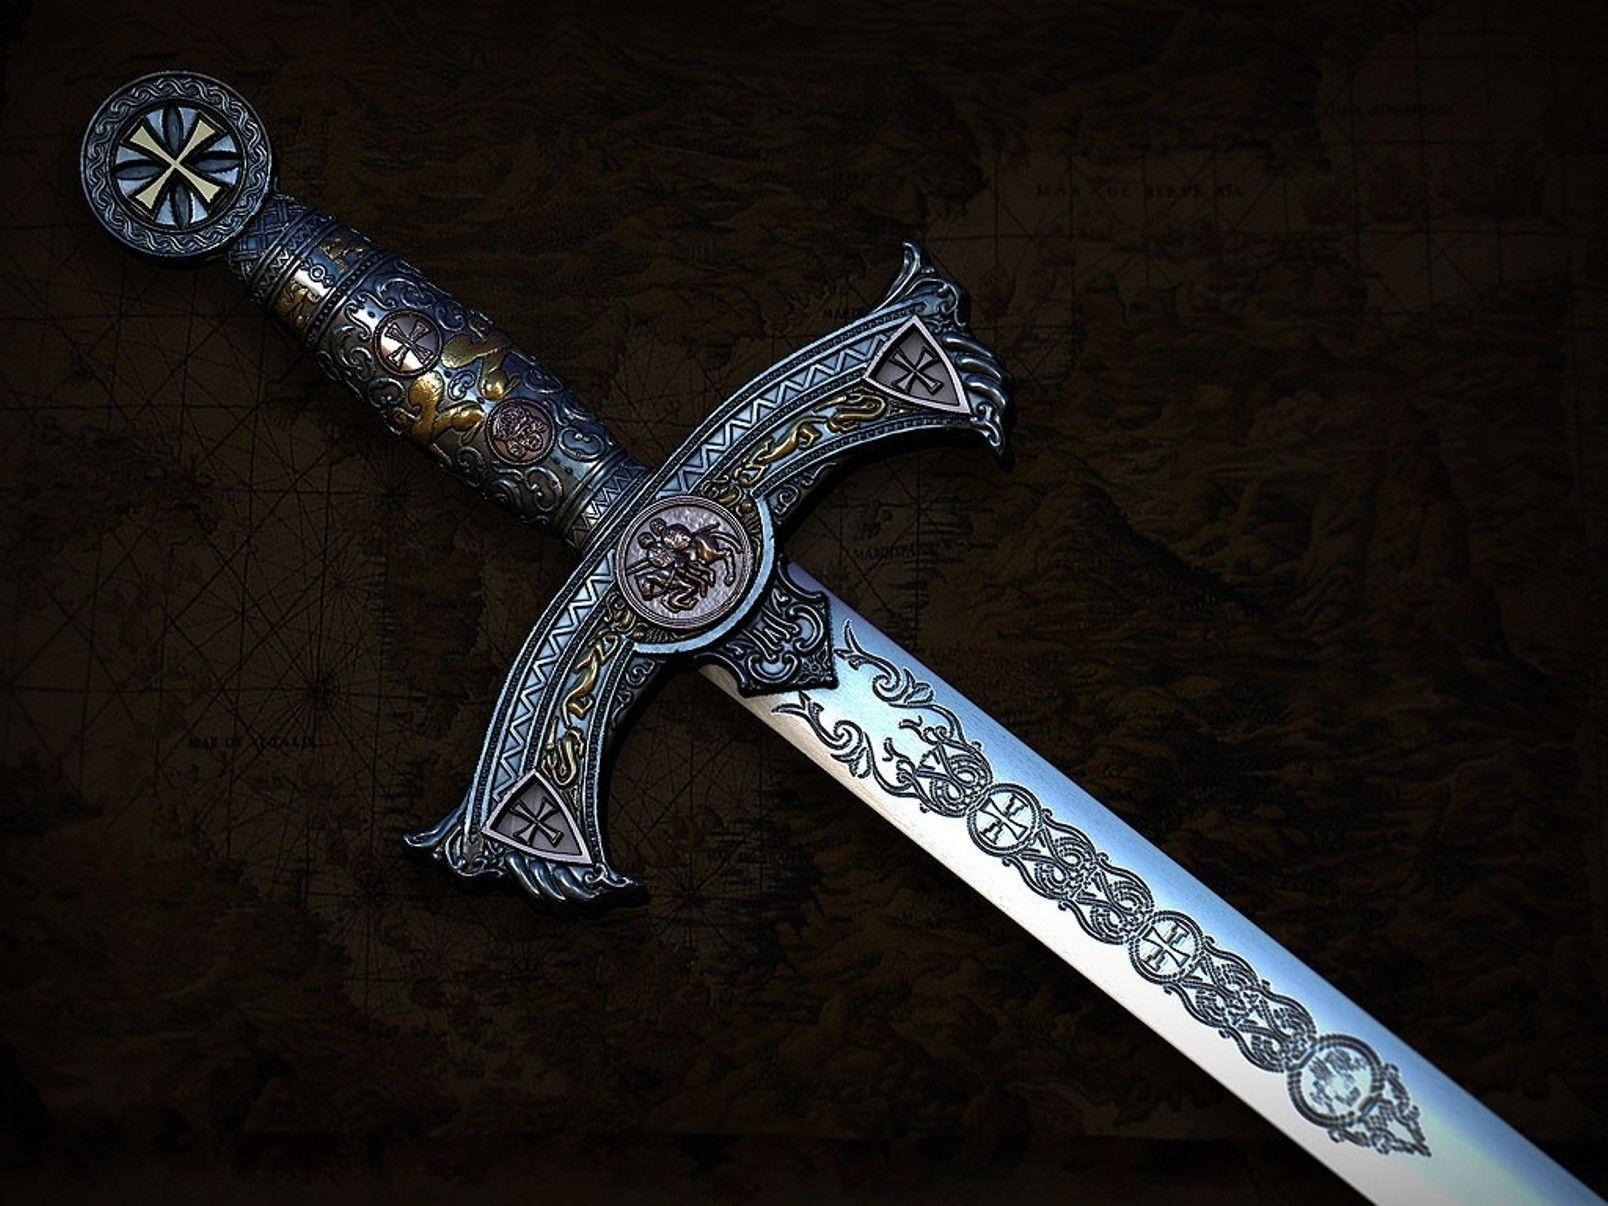 Sword Wallpaper HD Background, Image, Pics, Photo Free Download